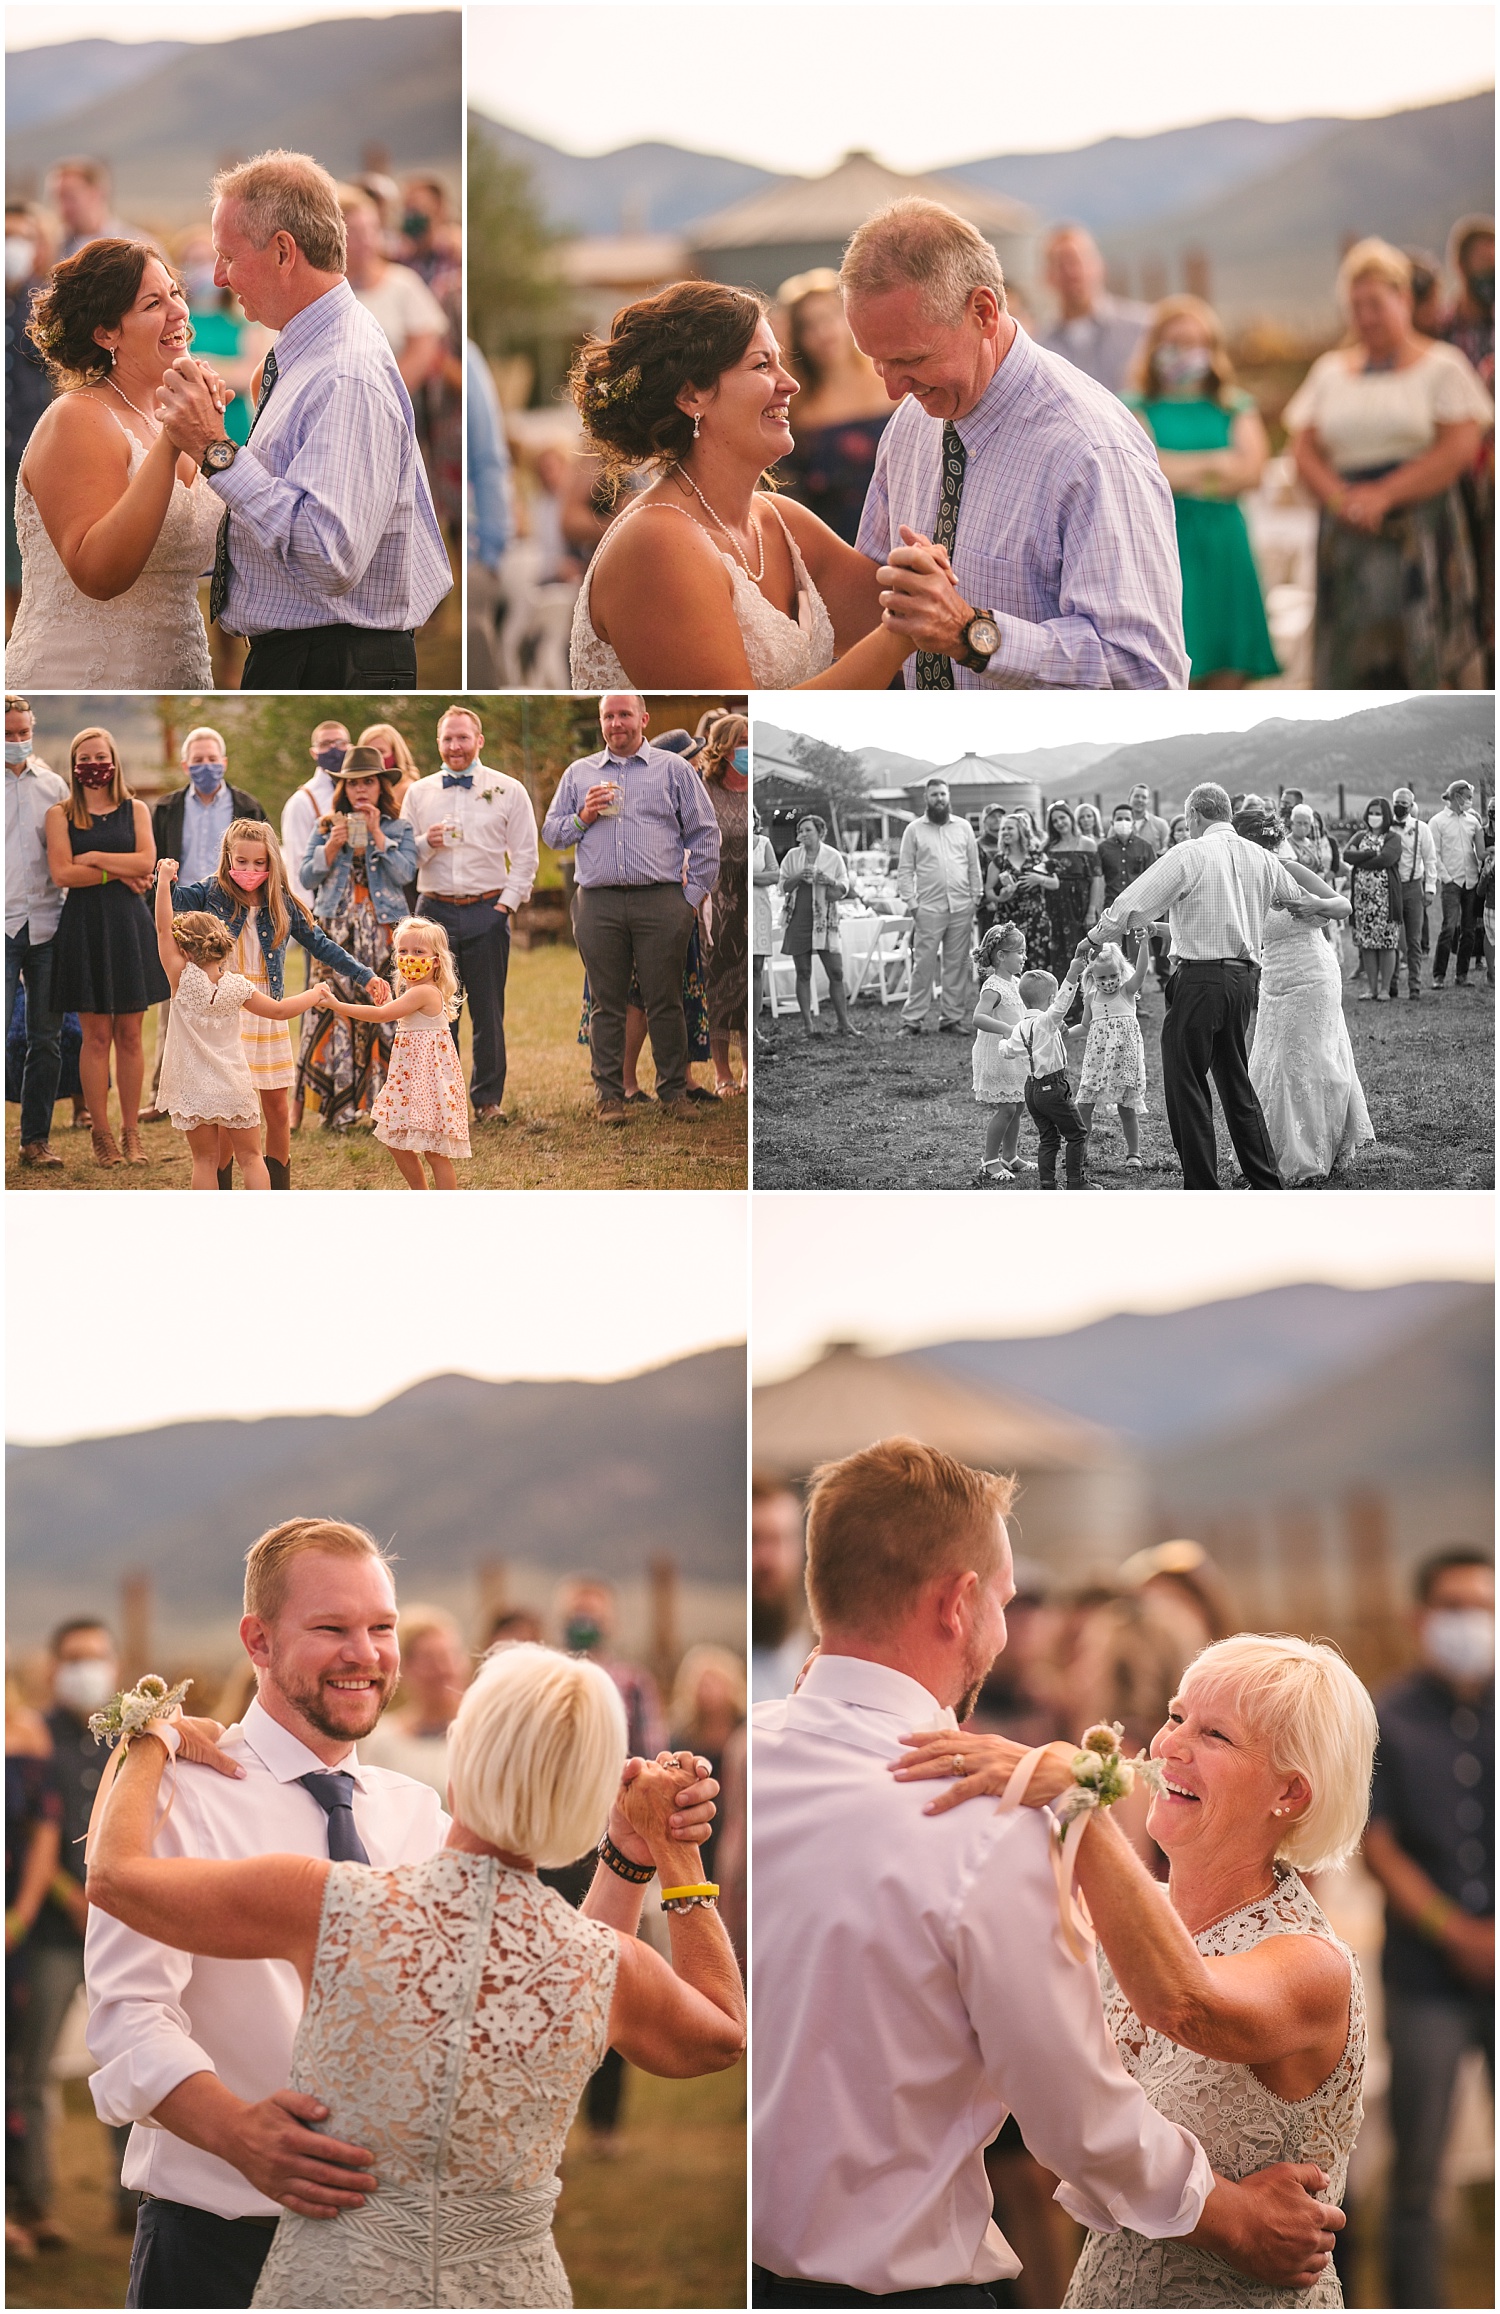 Bride and groom dance with parents at their outdoor Guyton Ranch wedding reception